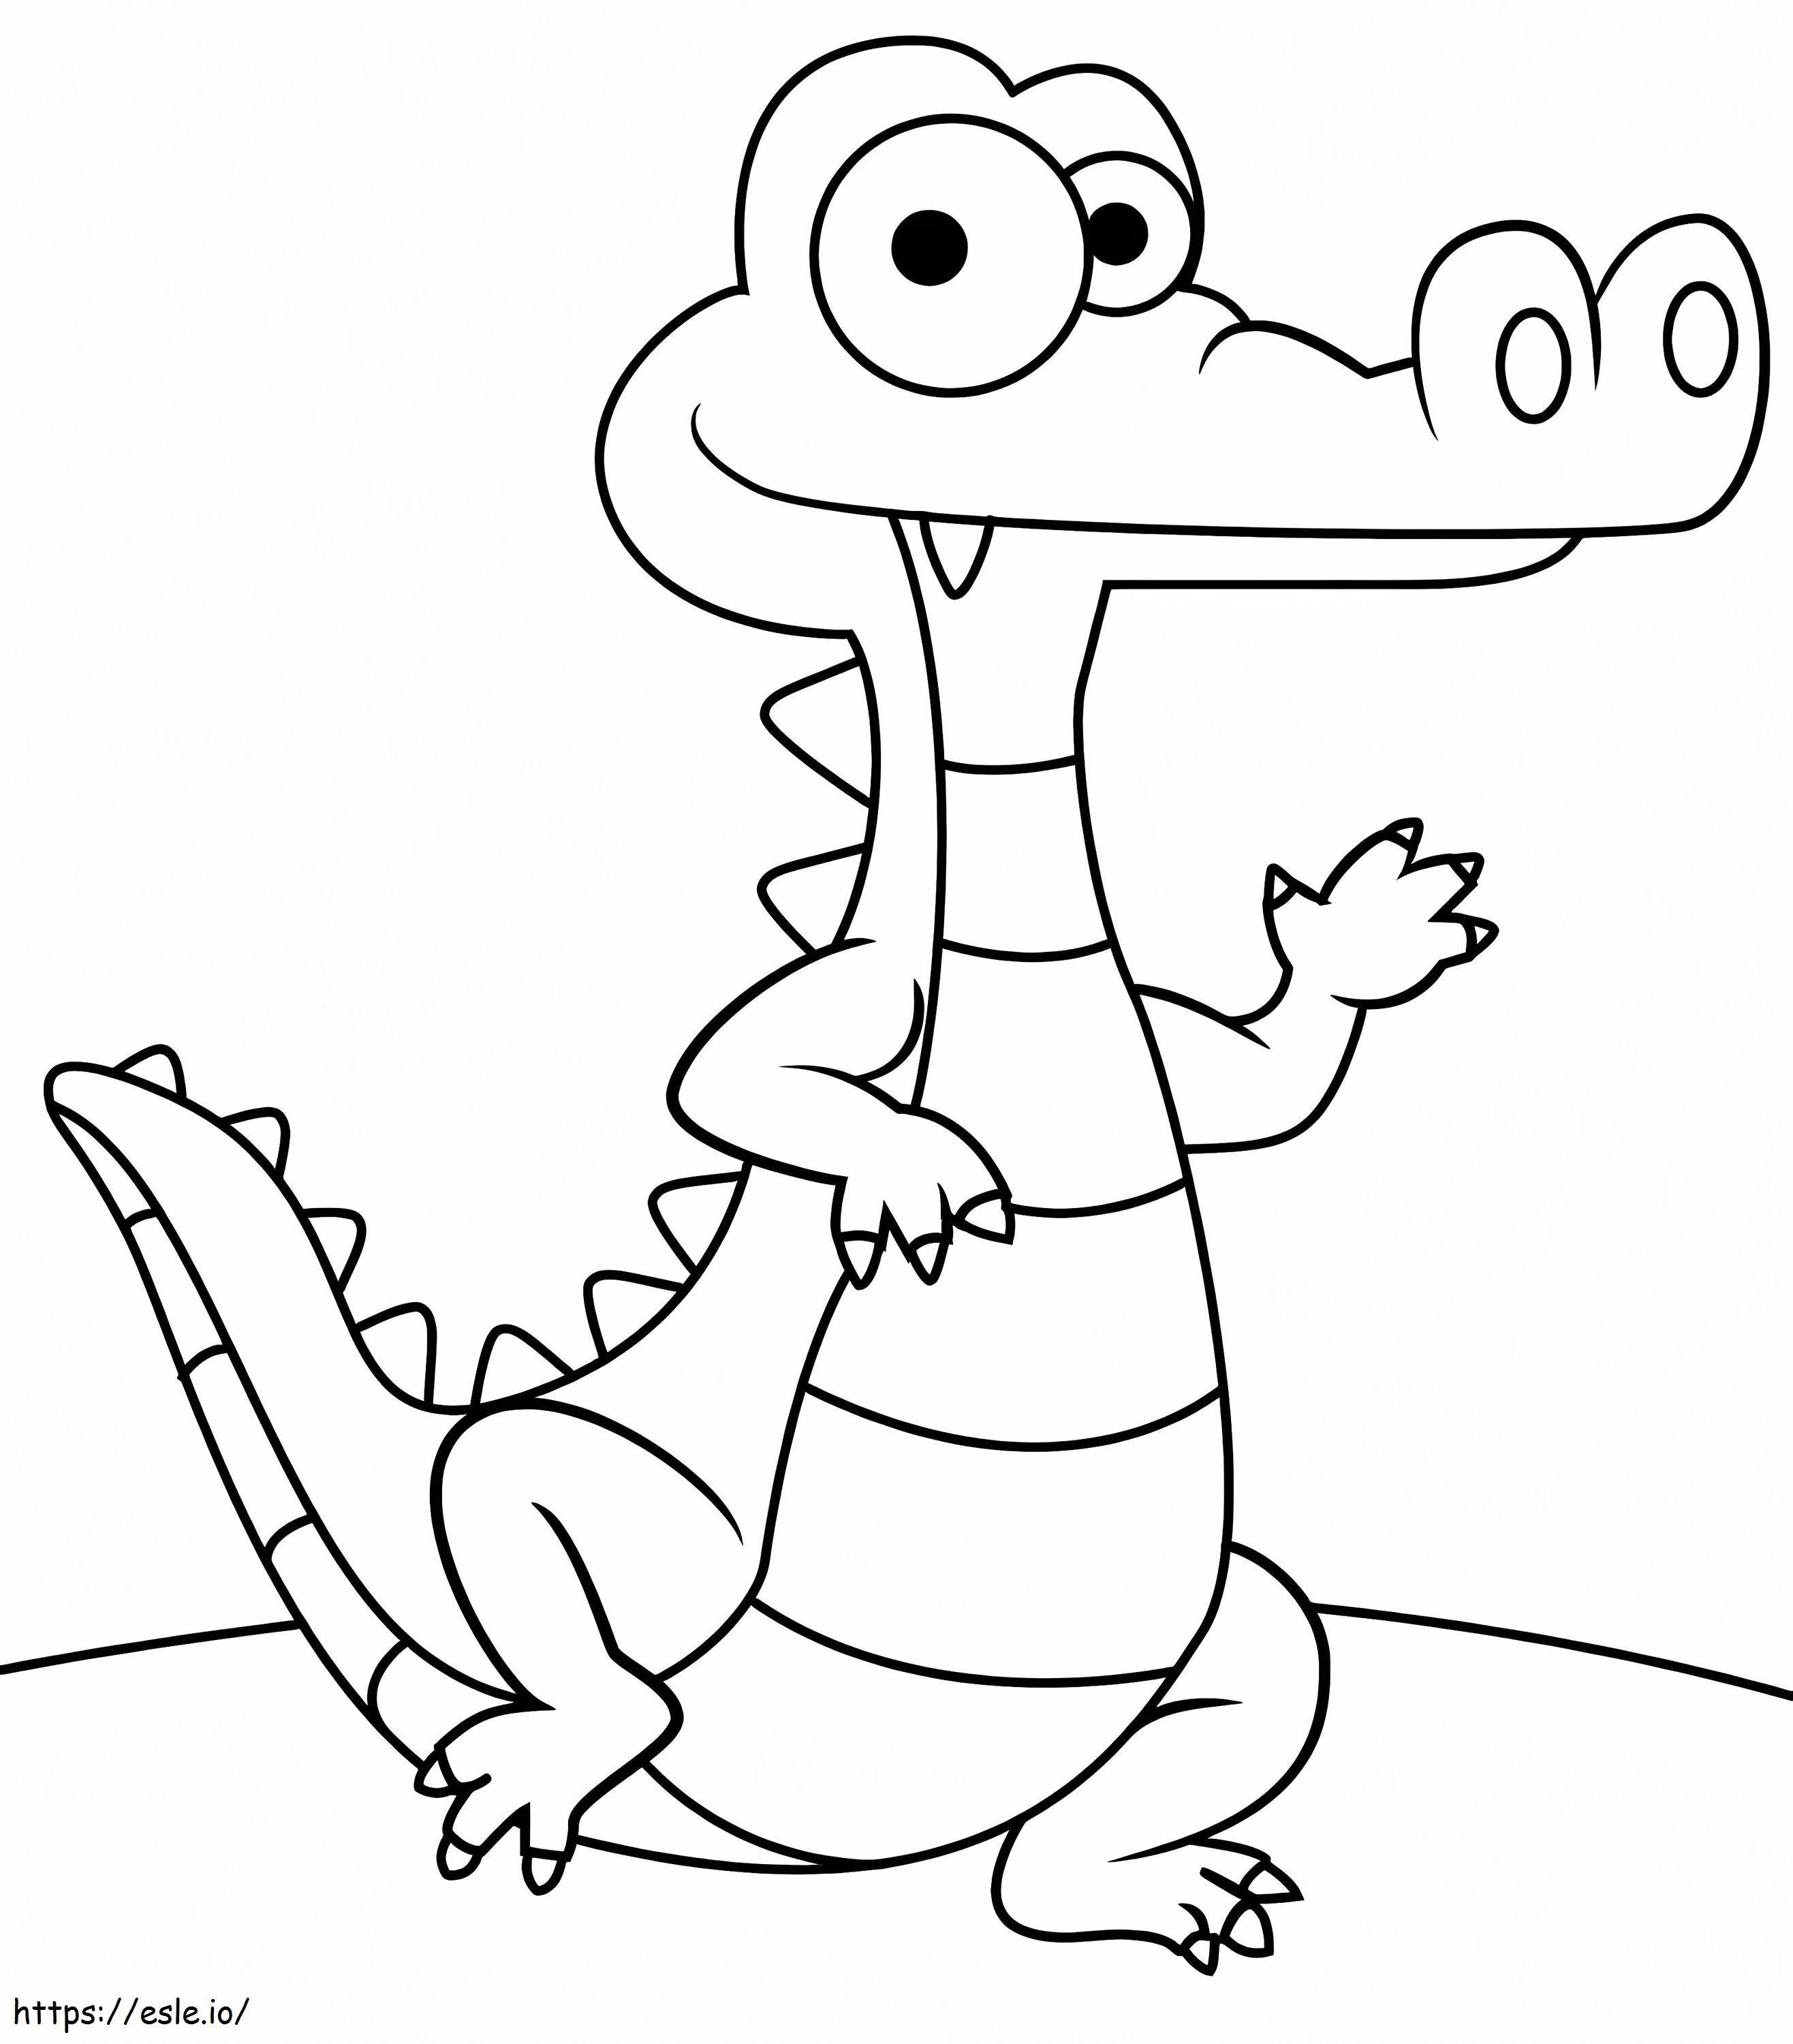 Little Alligator coloring page